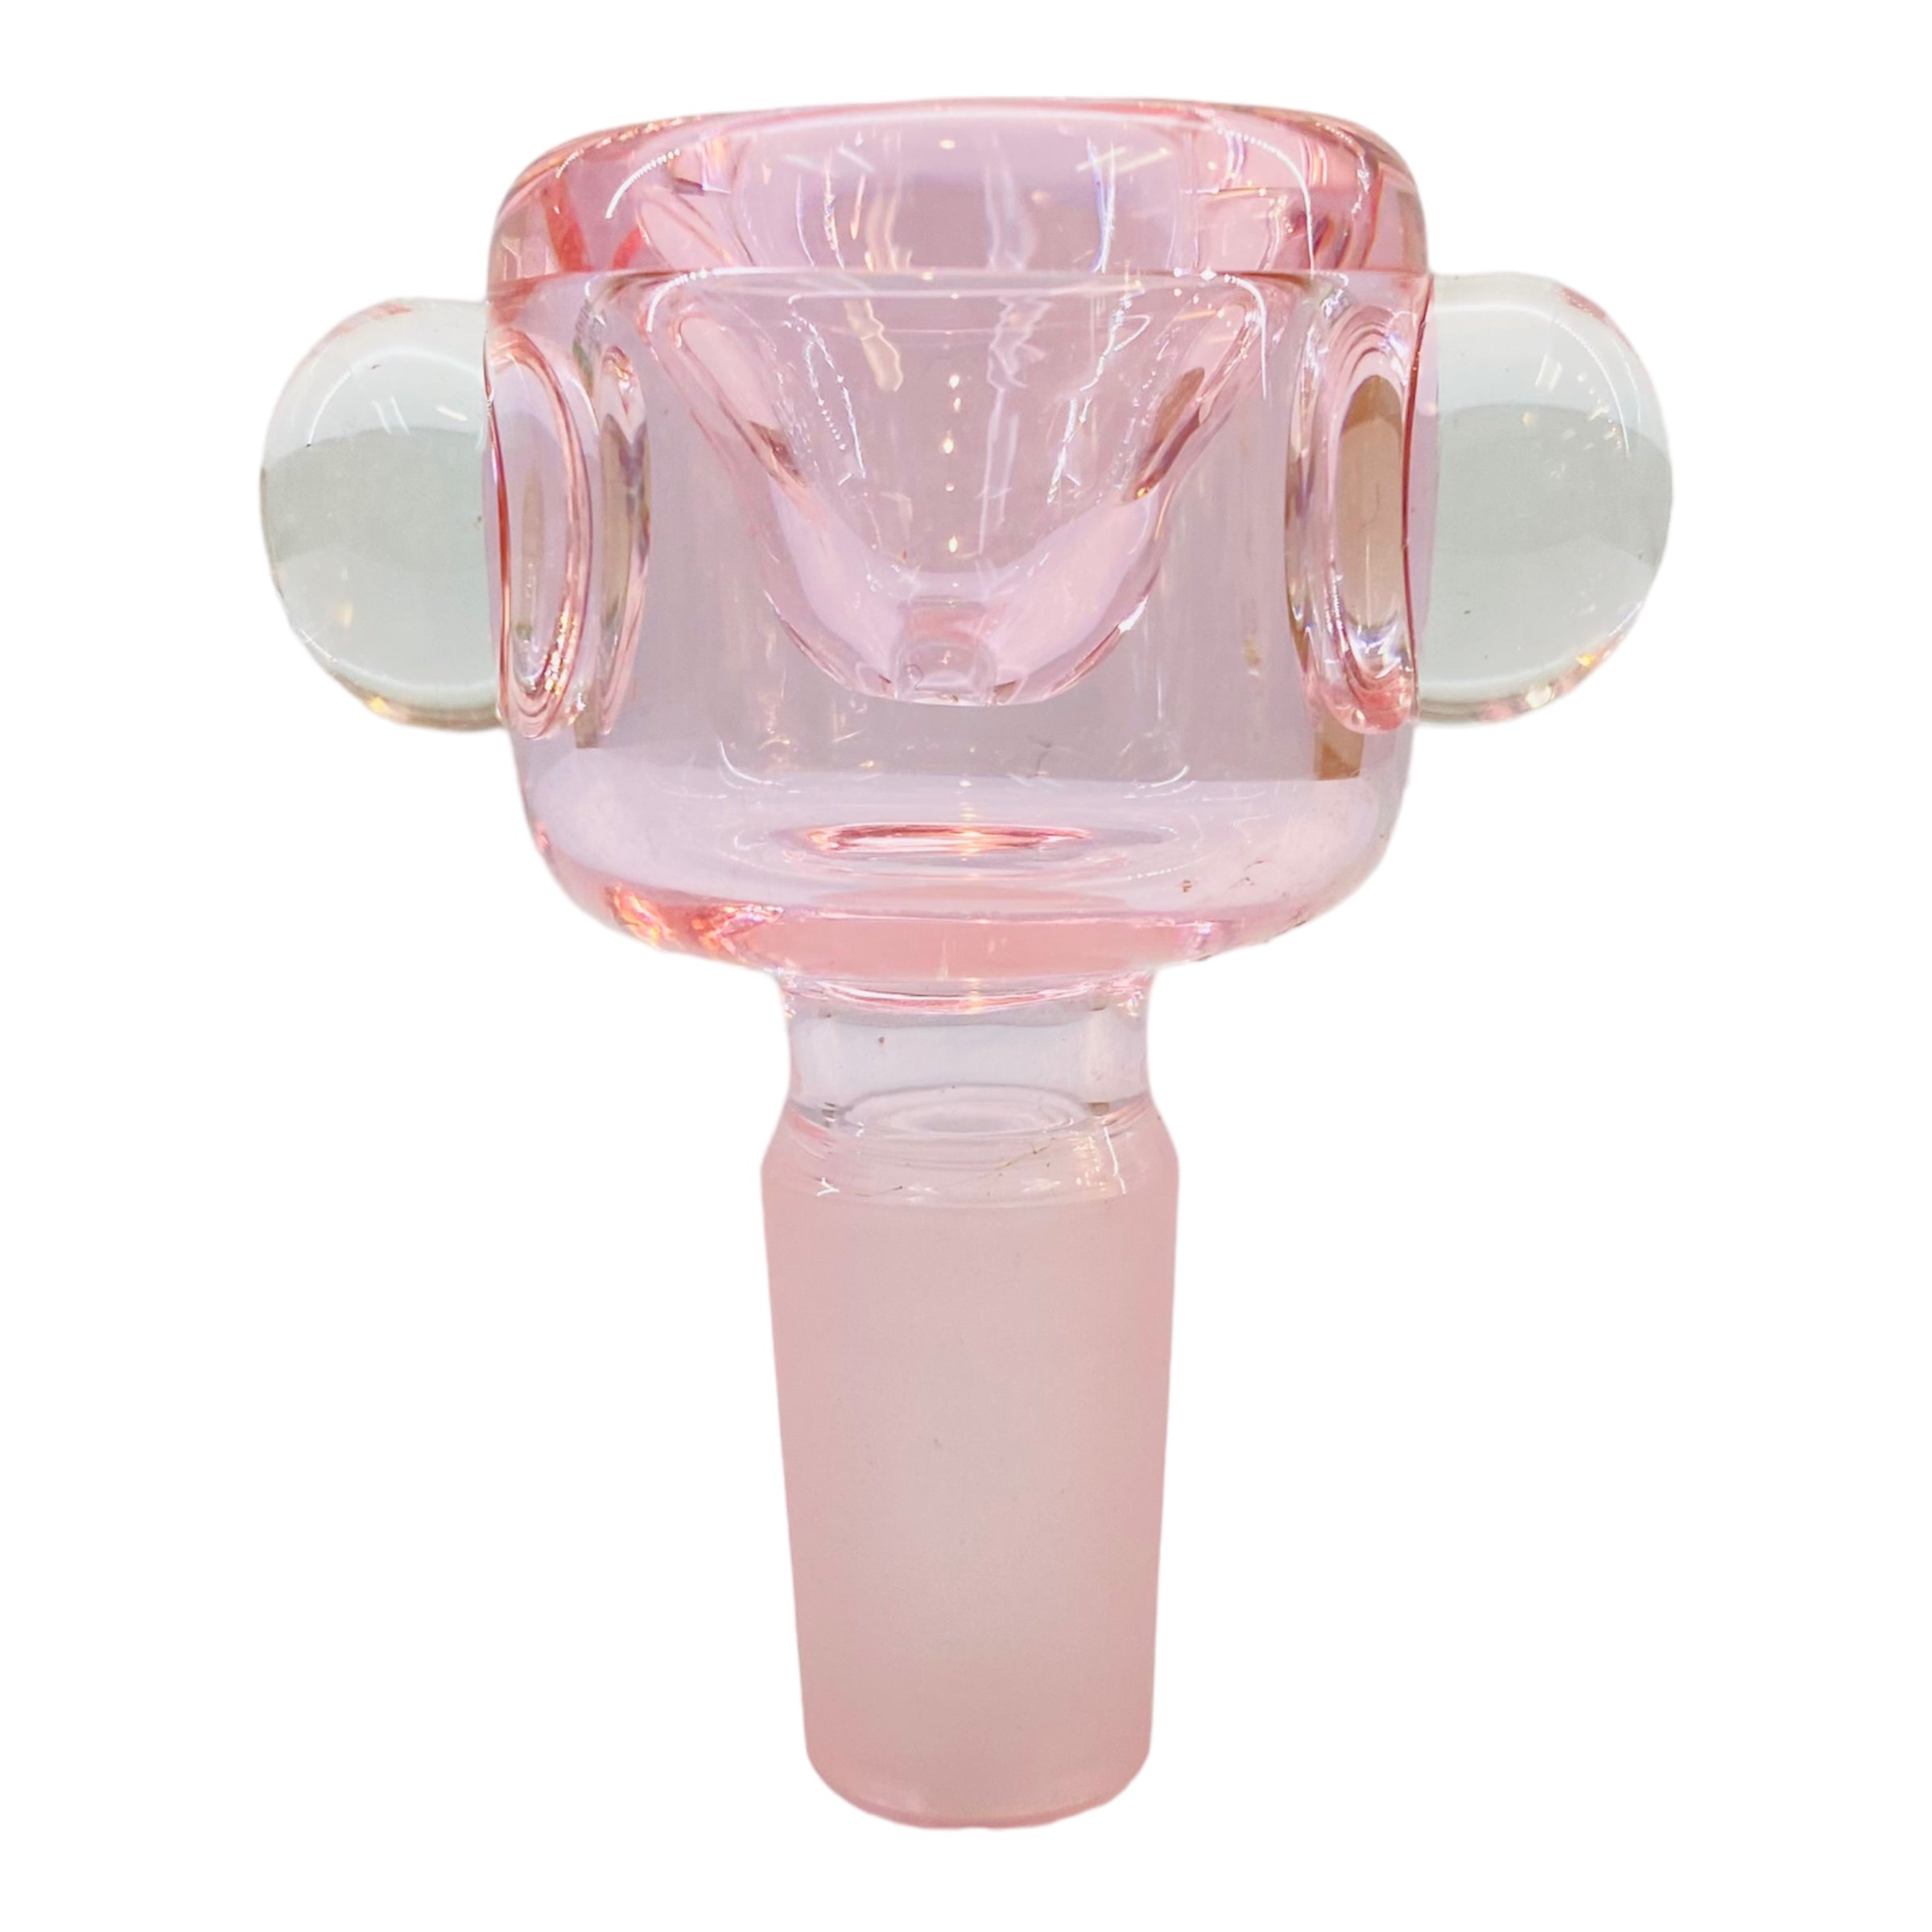 14mm Flower Bowl - Tall Straight Wall Bubble Bong Bowl Piece - Pink